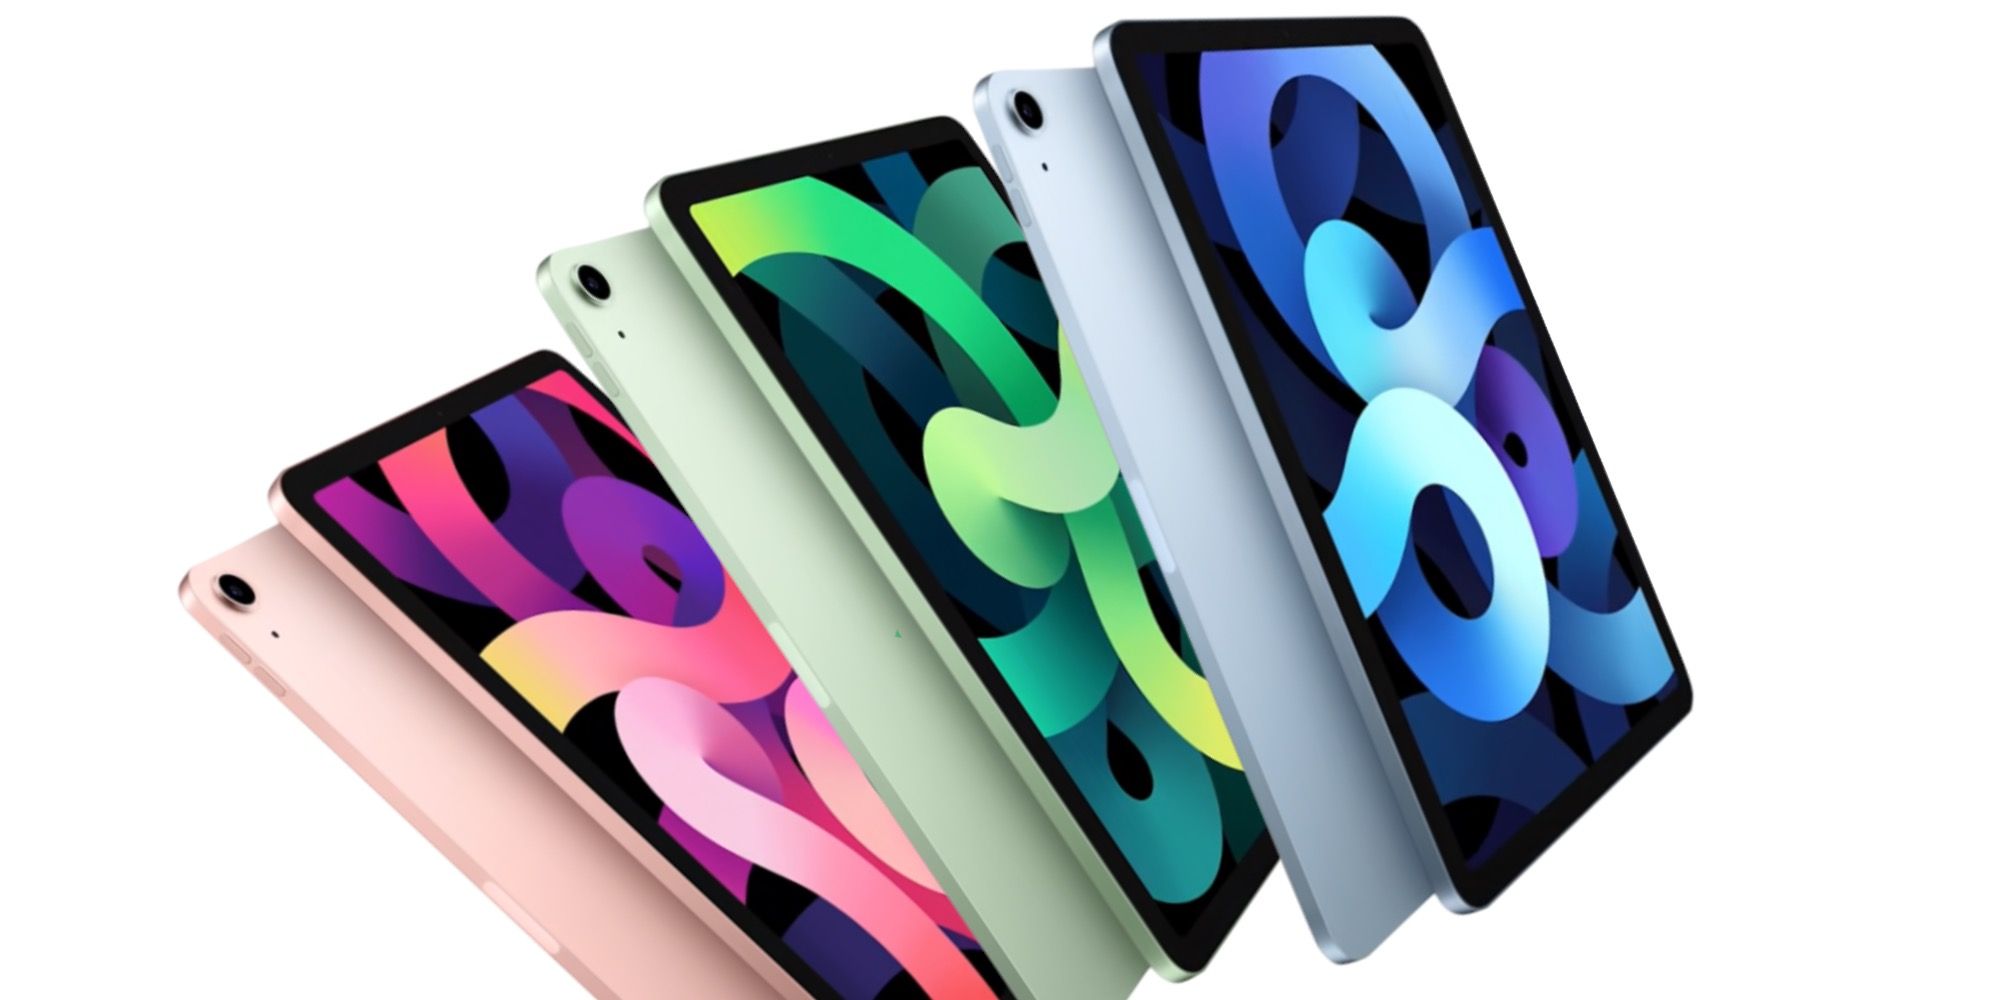 Apple iPad Air in pink, green, and blue